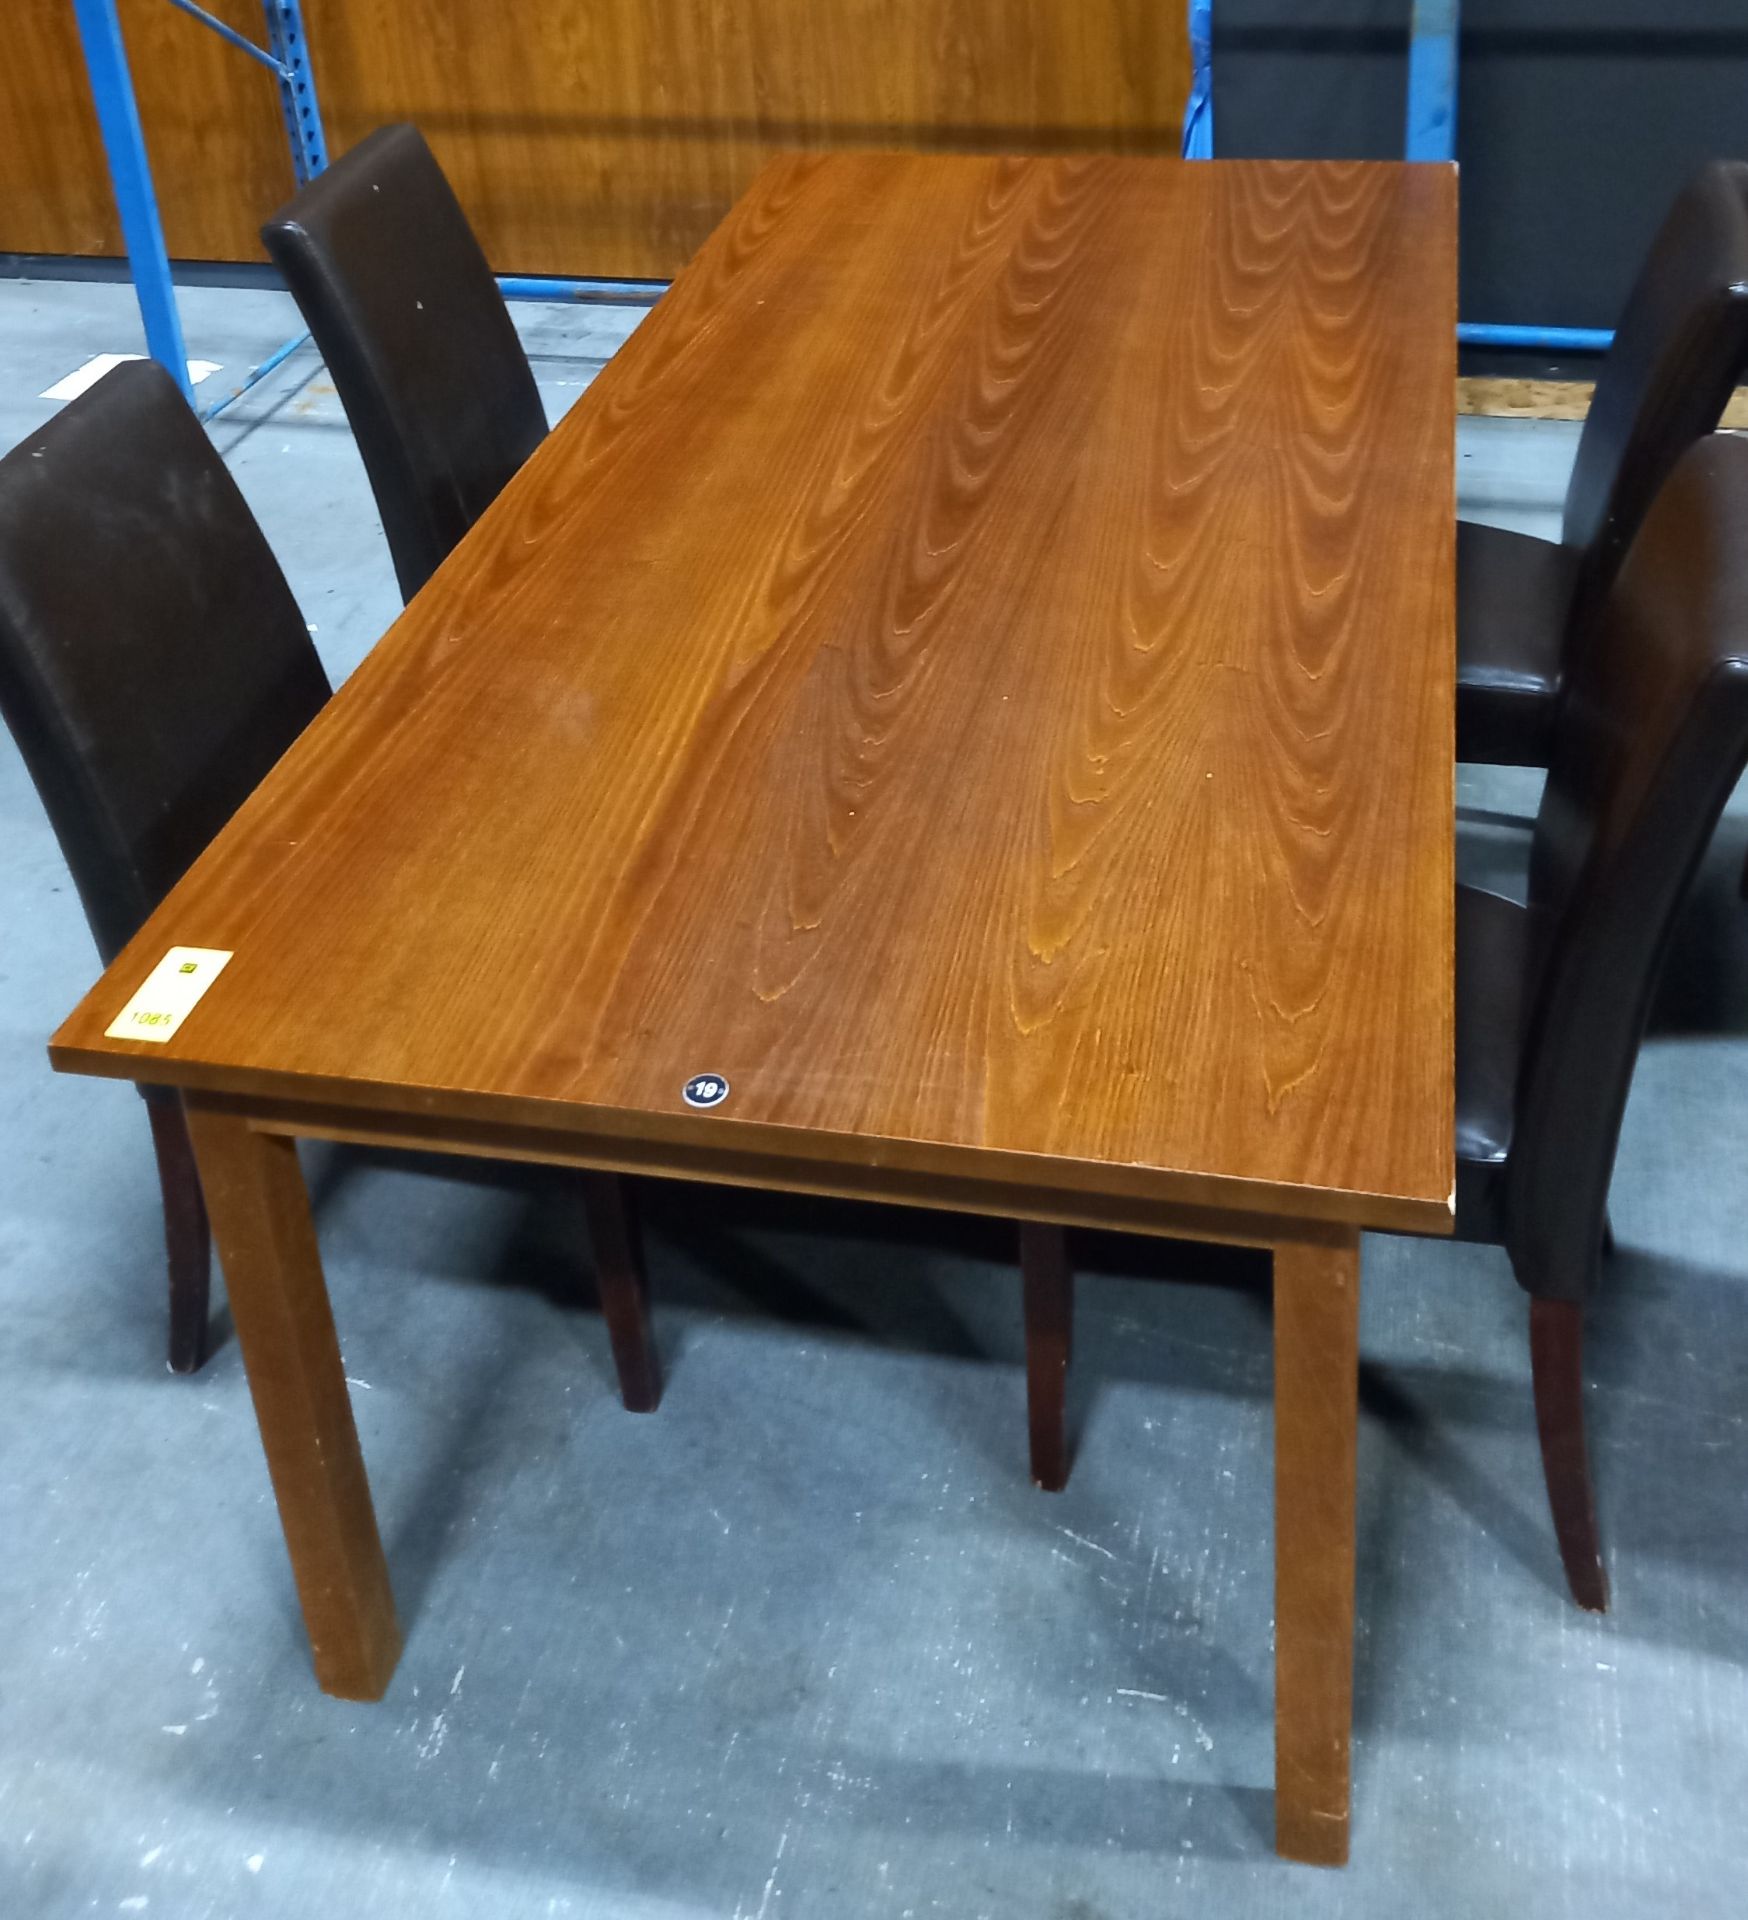 LARGE WOODEN DINING TABLE ( 200 X 100 X 75 CM) PLUS 4 DINING CHAIRS